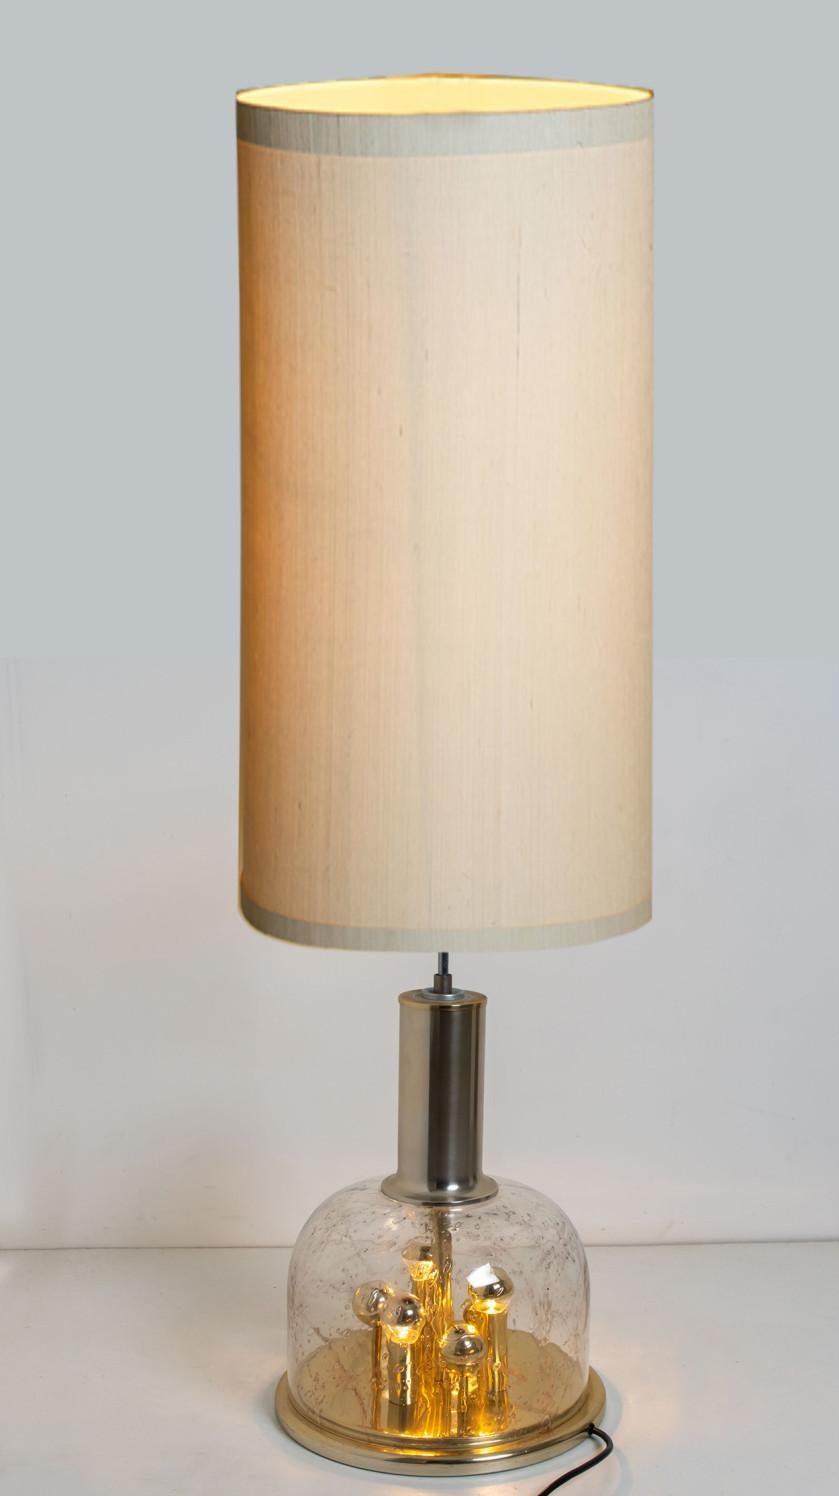 Doria hand blown glass sphere on brass base lamp, Germany, circa 1970. This exceptional artefact of modern design reflects the extreme interest in modernism across Europe during this period. This unique lamp not only functions as light source but